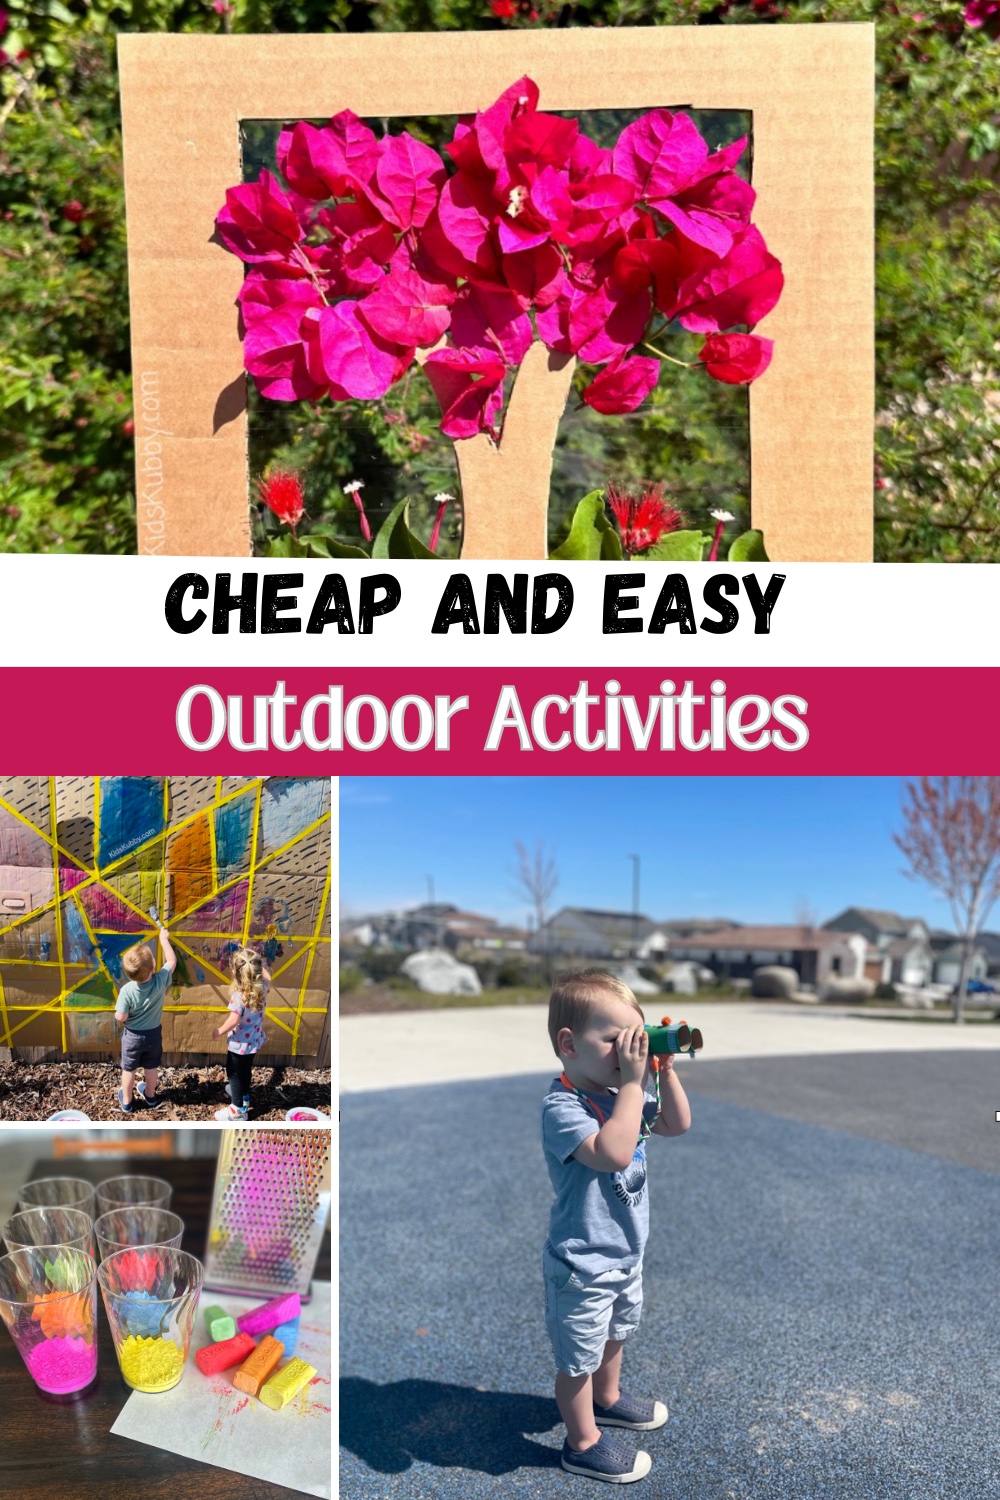 Are you looking for cheap and easy outdoor summer activities? Look no further your kids will love using their creativity and imagination with the fantastic outside activities!